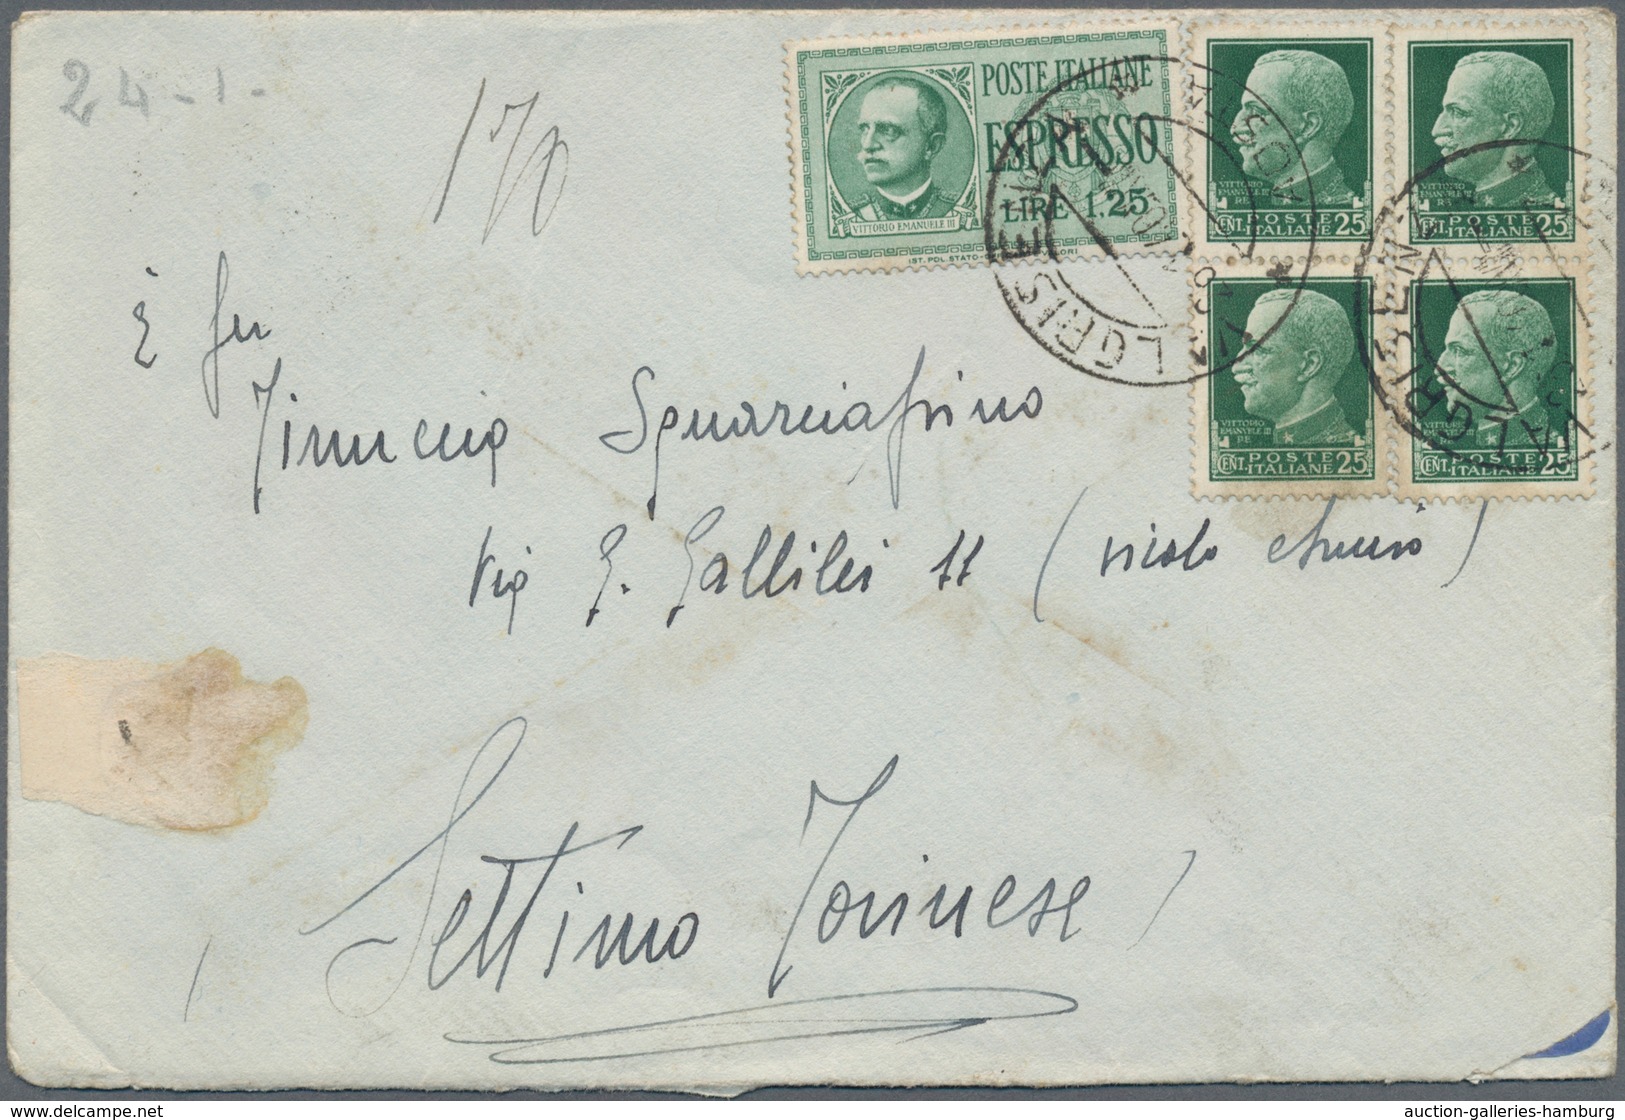 Italien - Lokalausgaben 1944/45 - Aosta: 1939/1940, lot of 57 covers used in the Aosta Valley (Valle